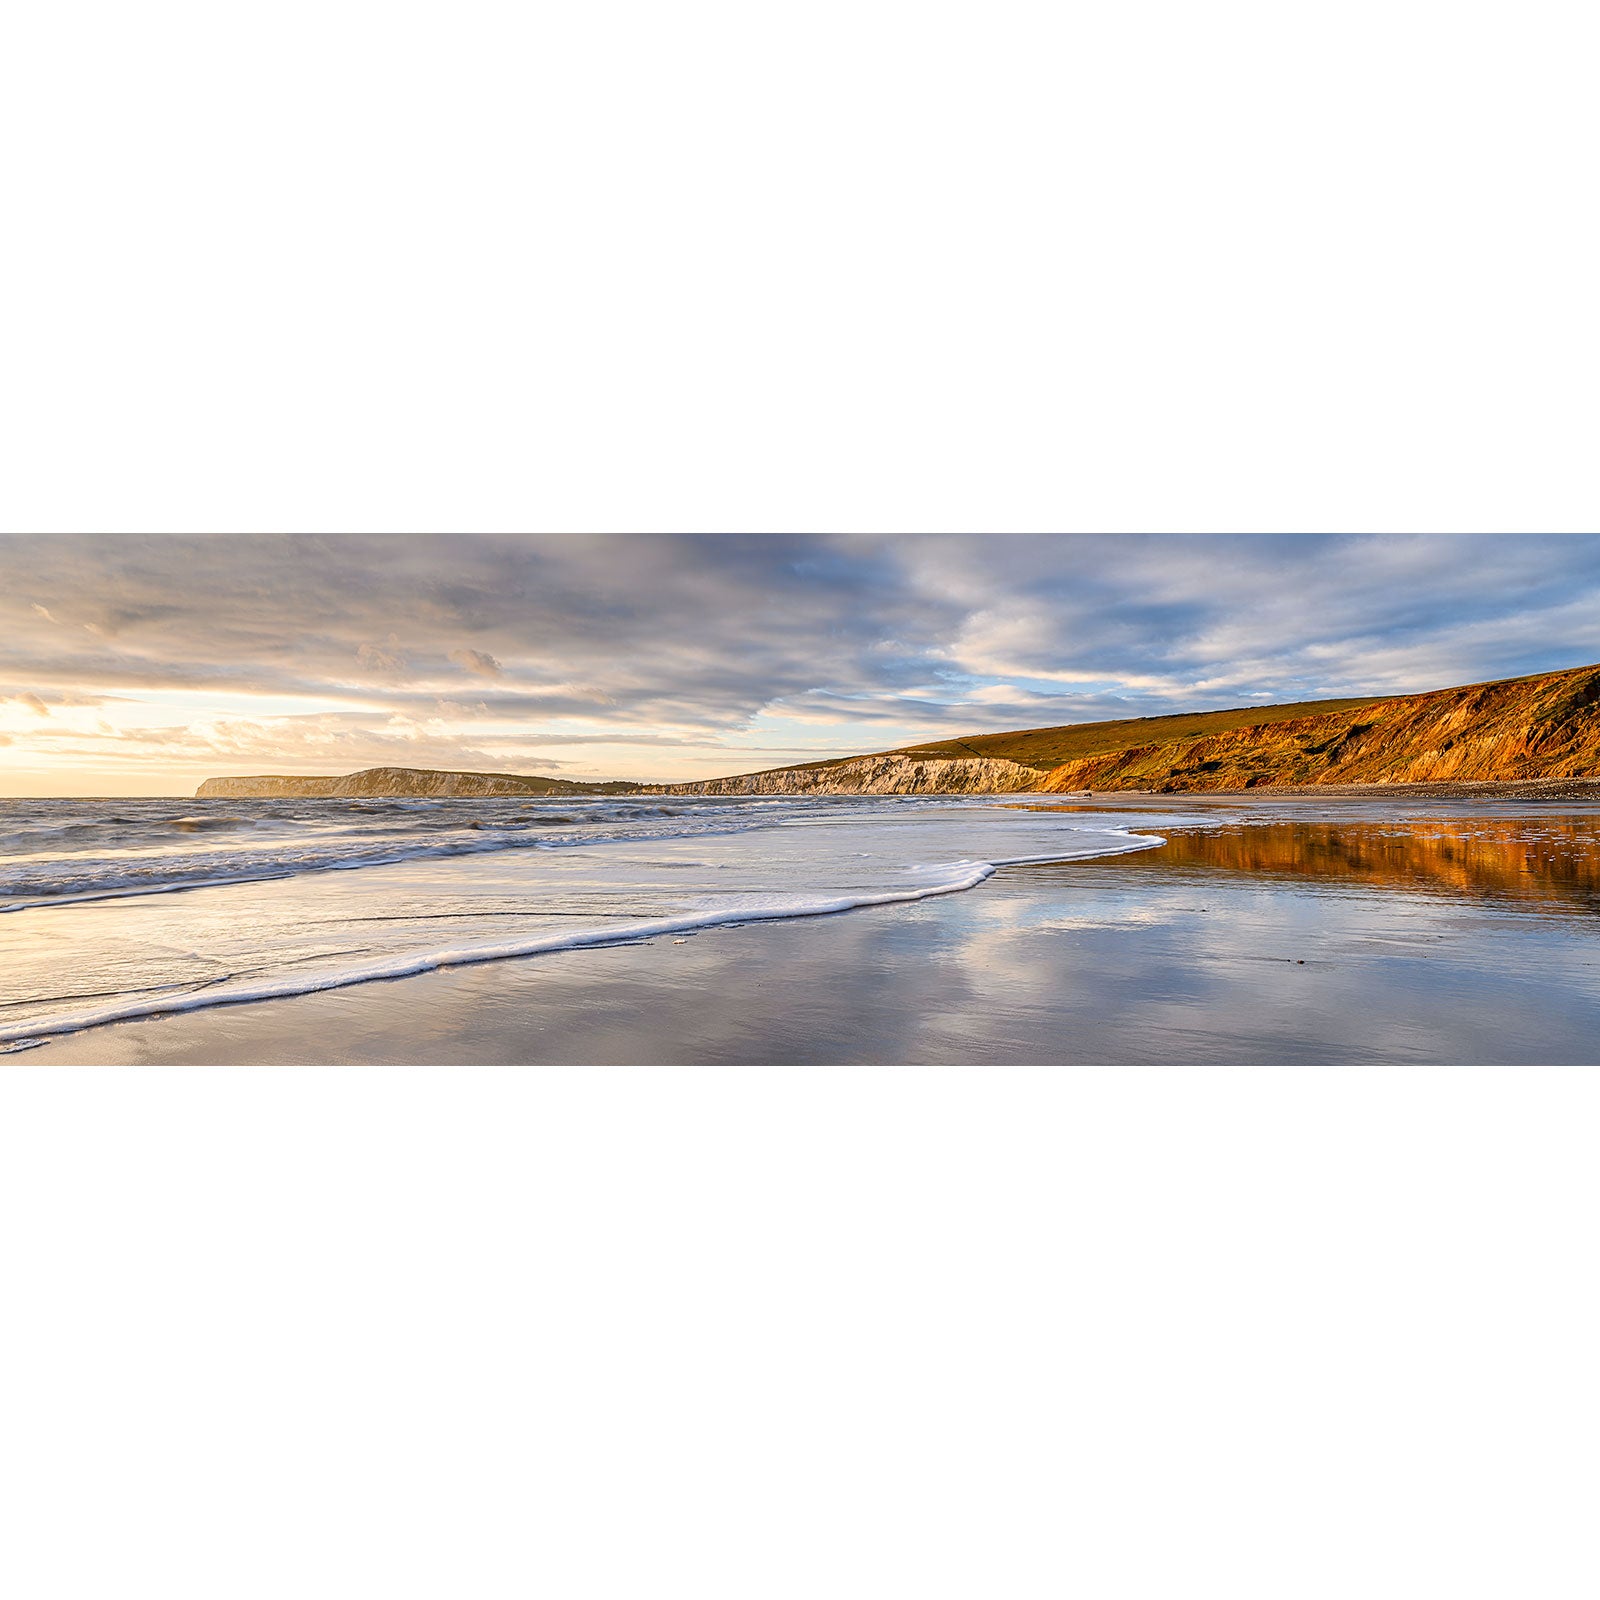 A panoramic view of Compton Bay, a serene beach at sunset with waves gently lapping the shore and a cliff in the distance, evoking the tranquil scenes captured by Steve.